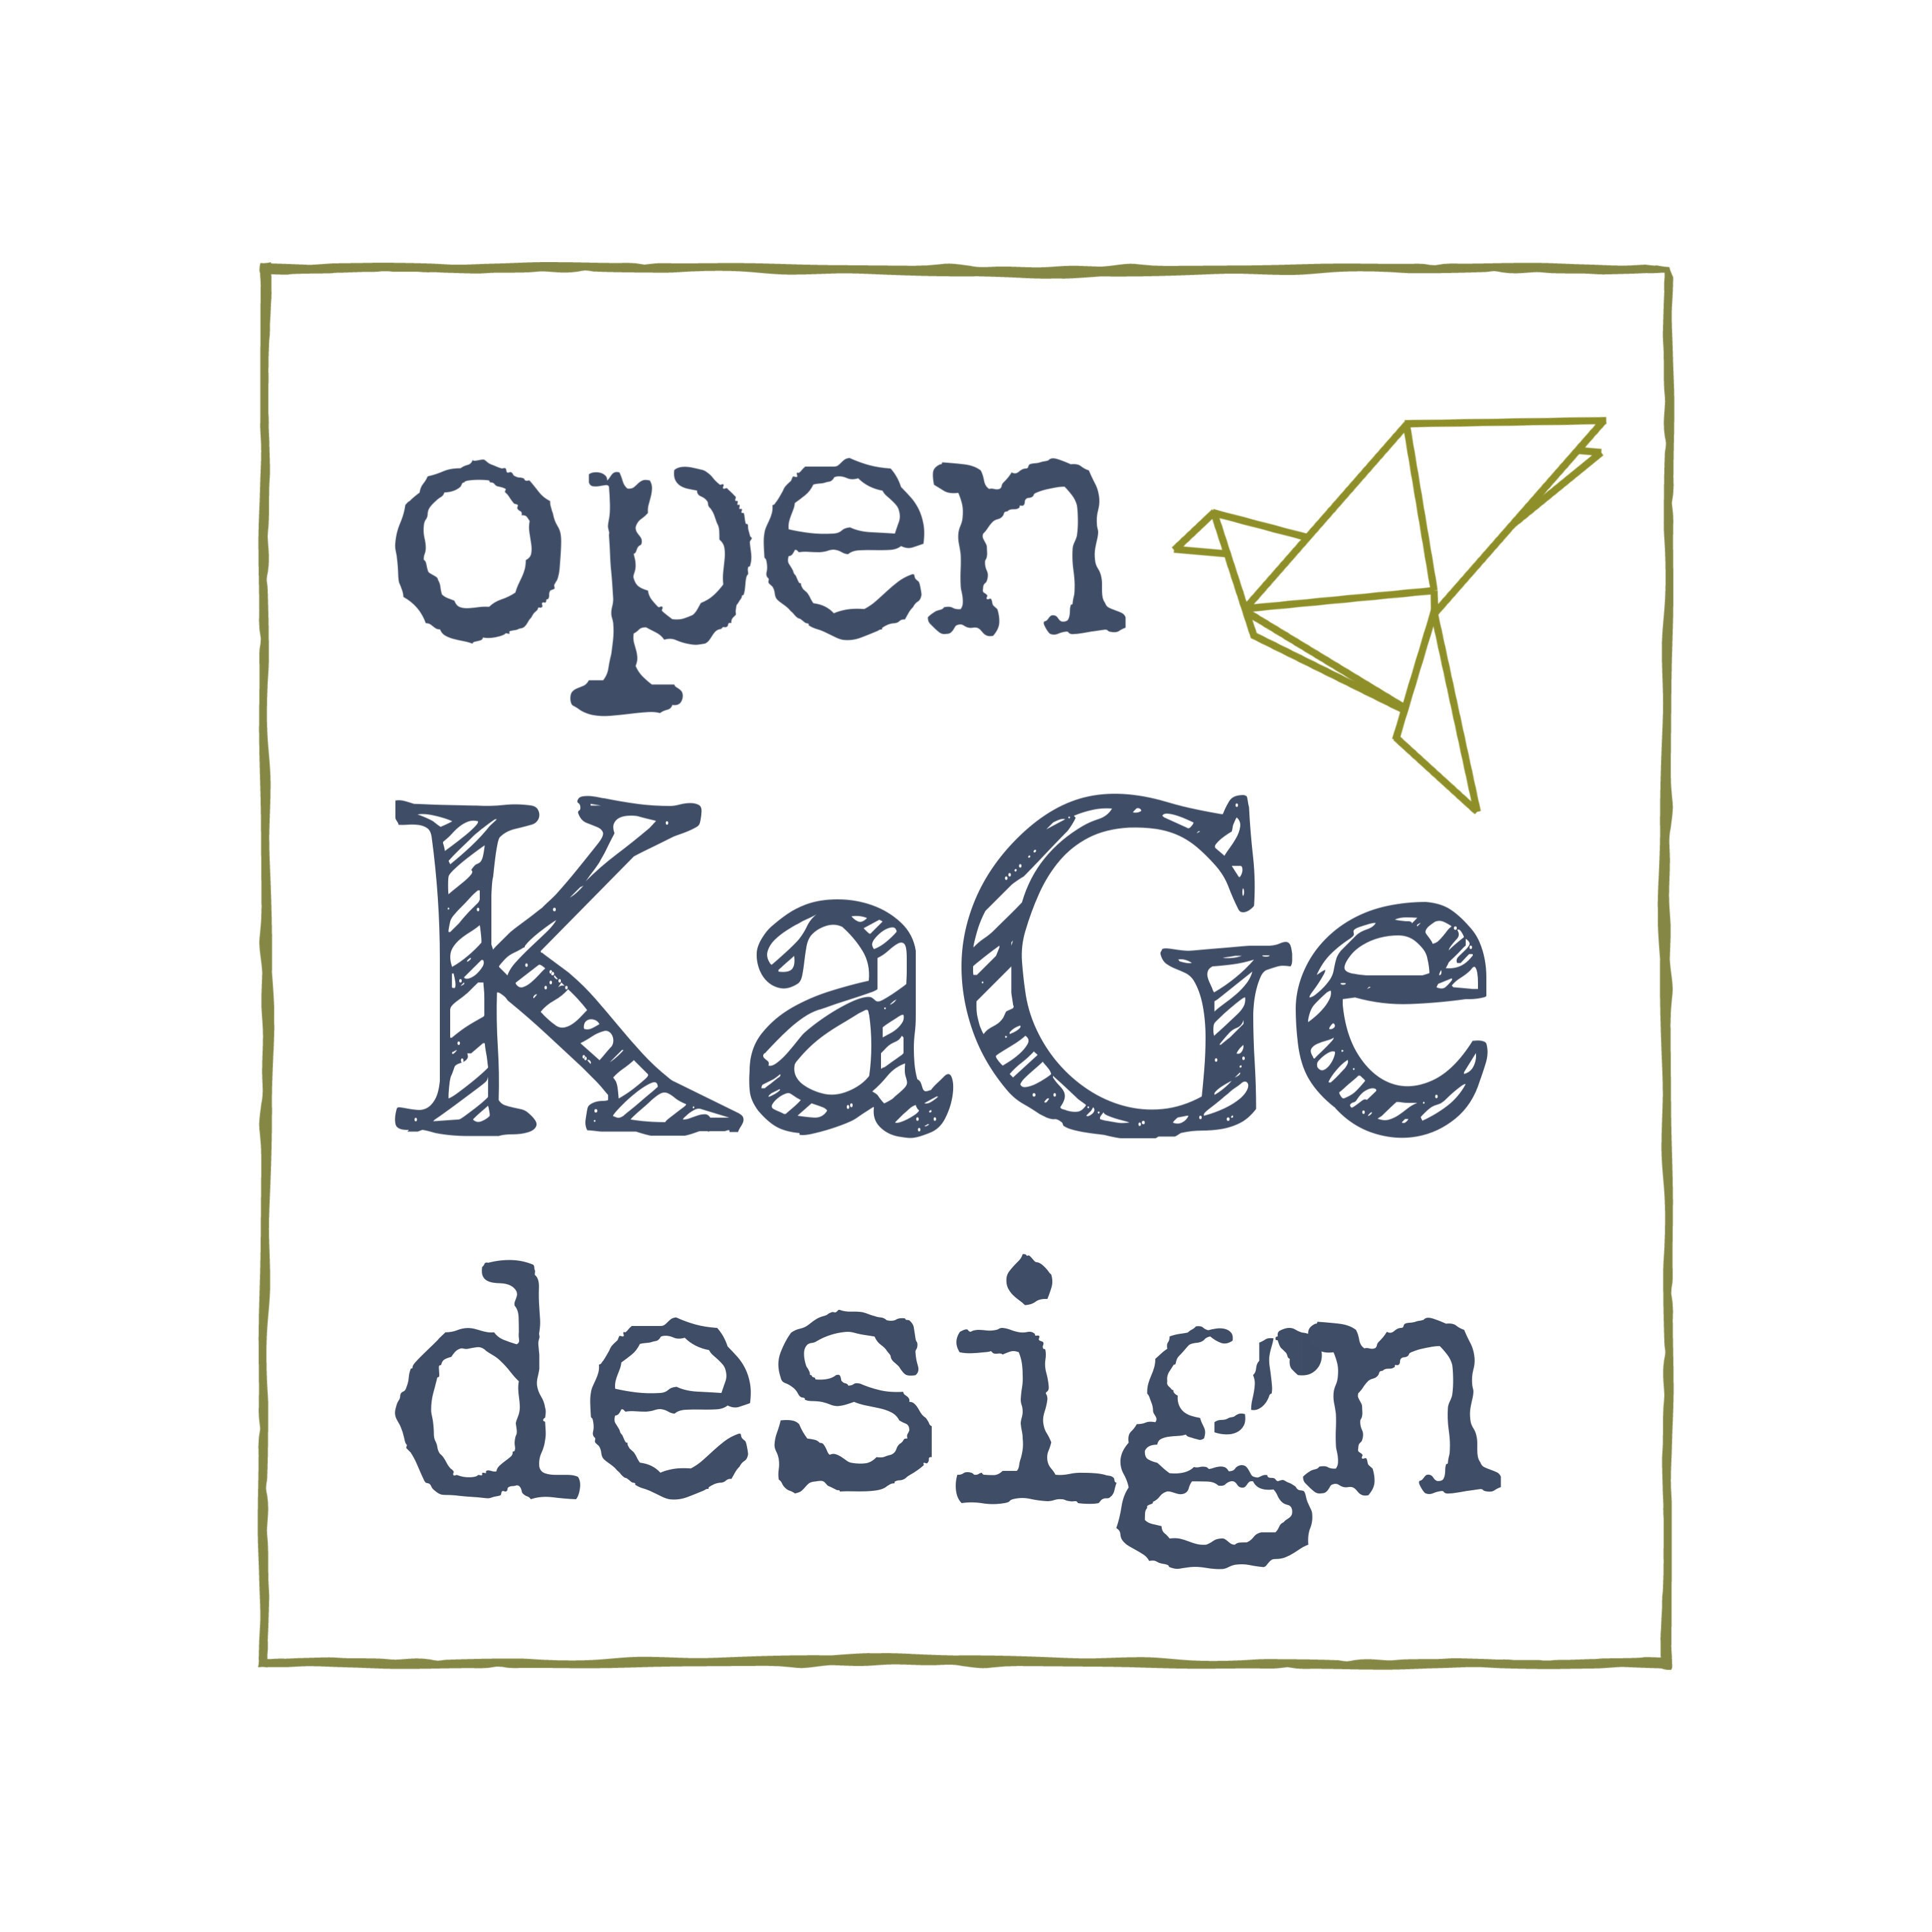 Open Kage Design By Openkage On Etsy